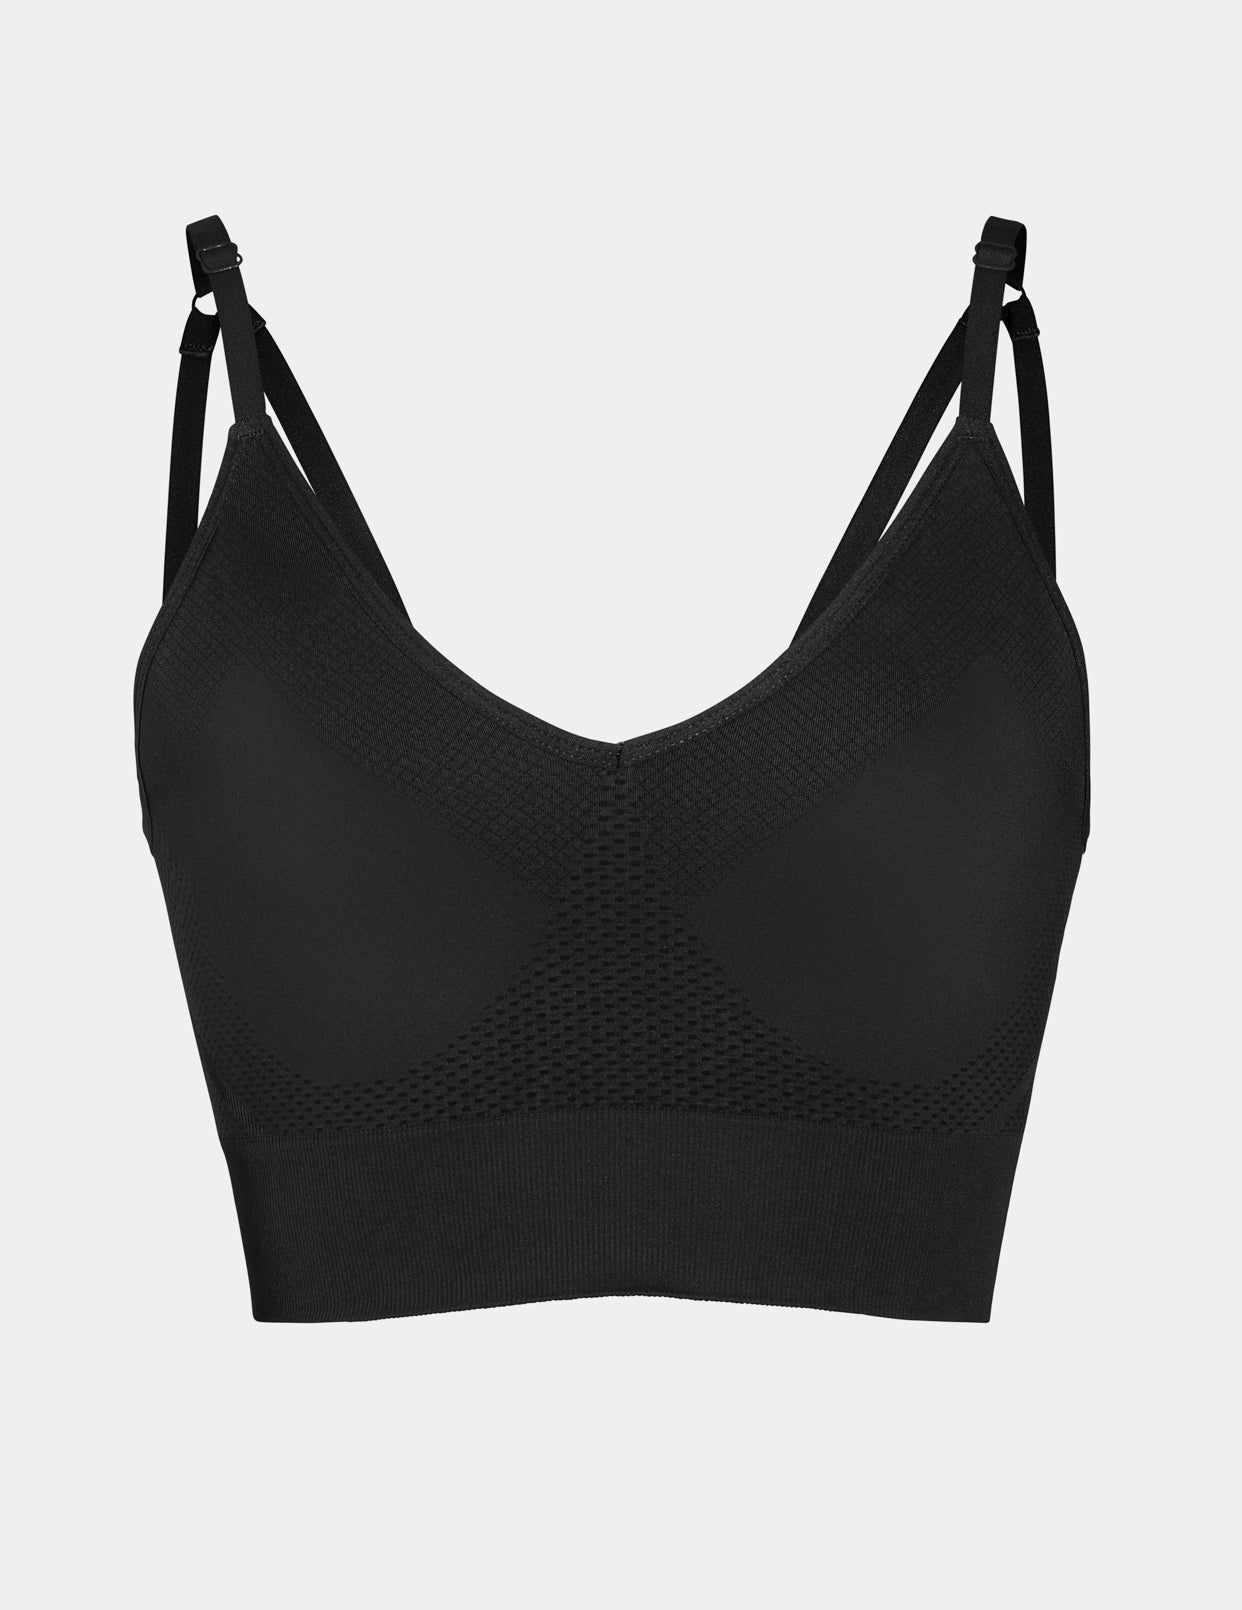 Looking thinner refreshing Bra new color arrival *